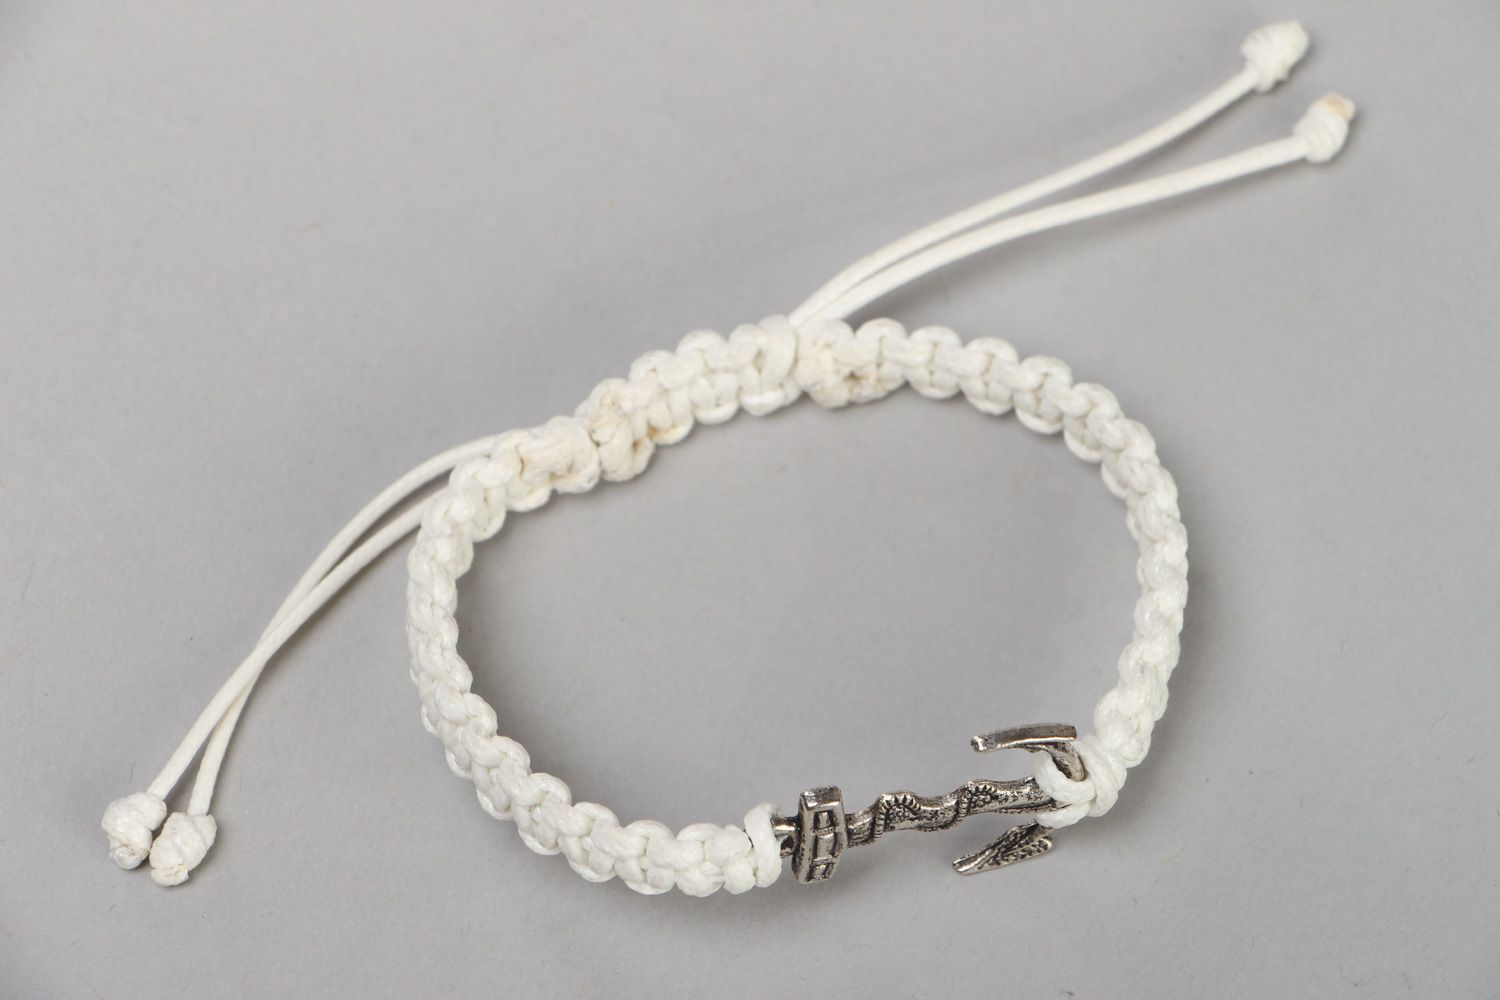 This handmade marine wrist bracelet woven of white synthetic cord for women photo 2